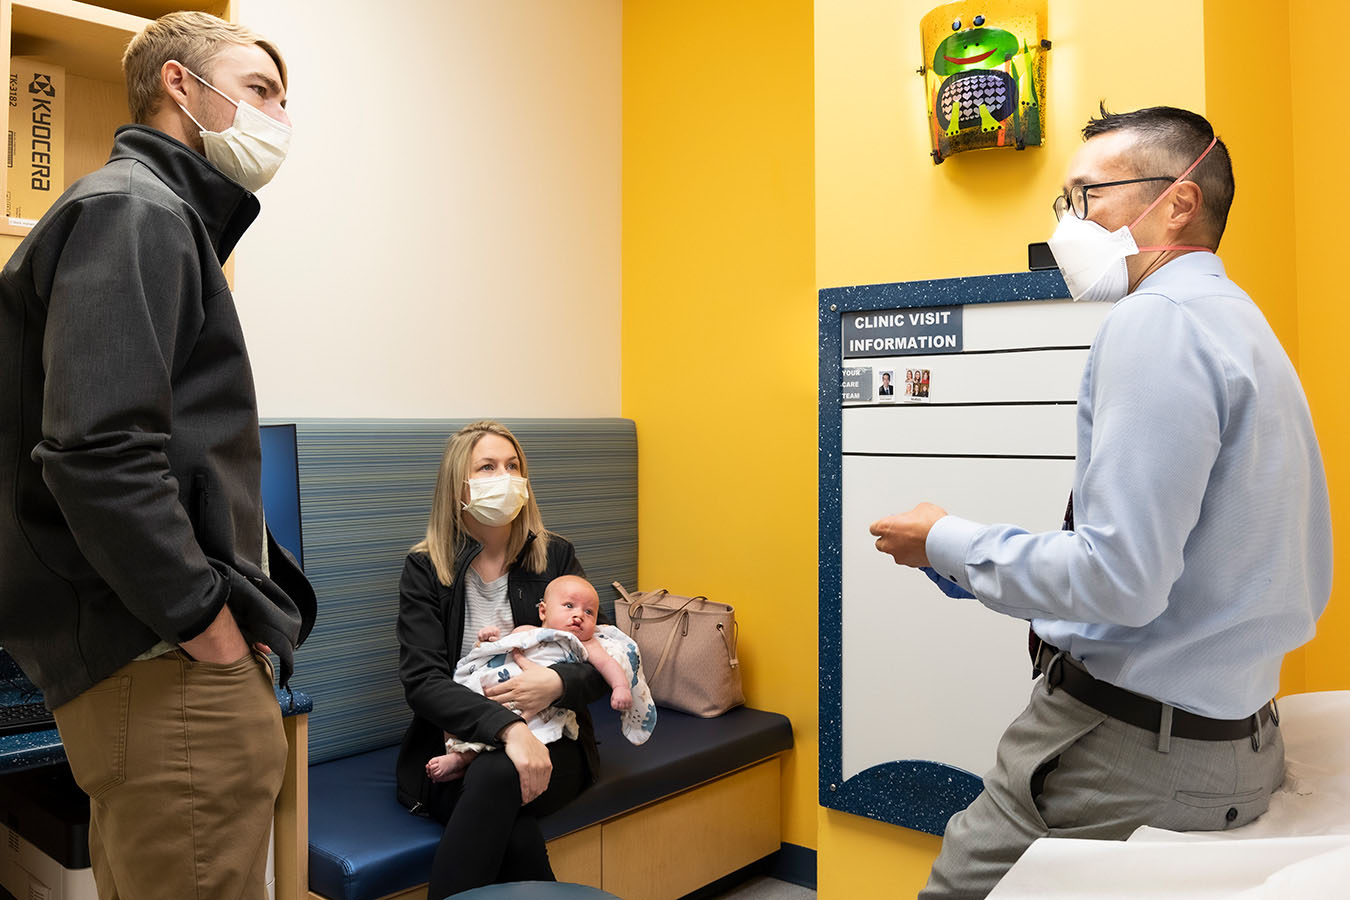 A Seattle Children's doctor talks with a patient and family